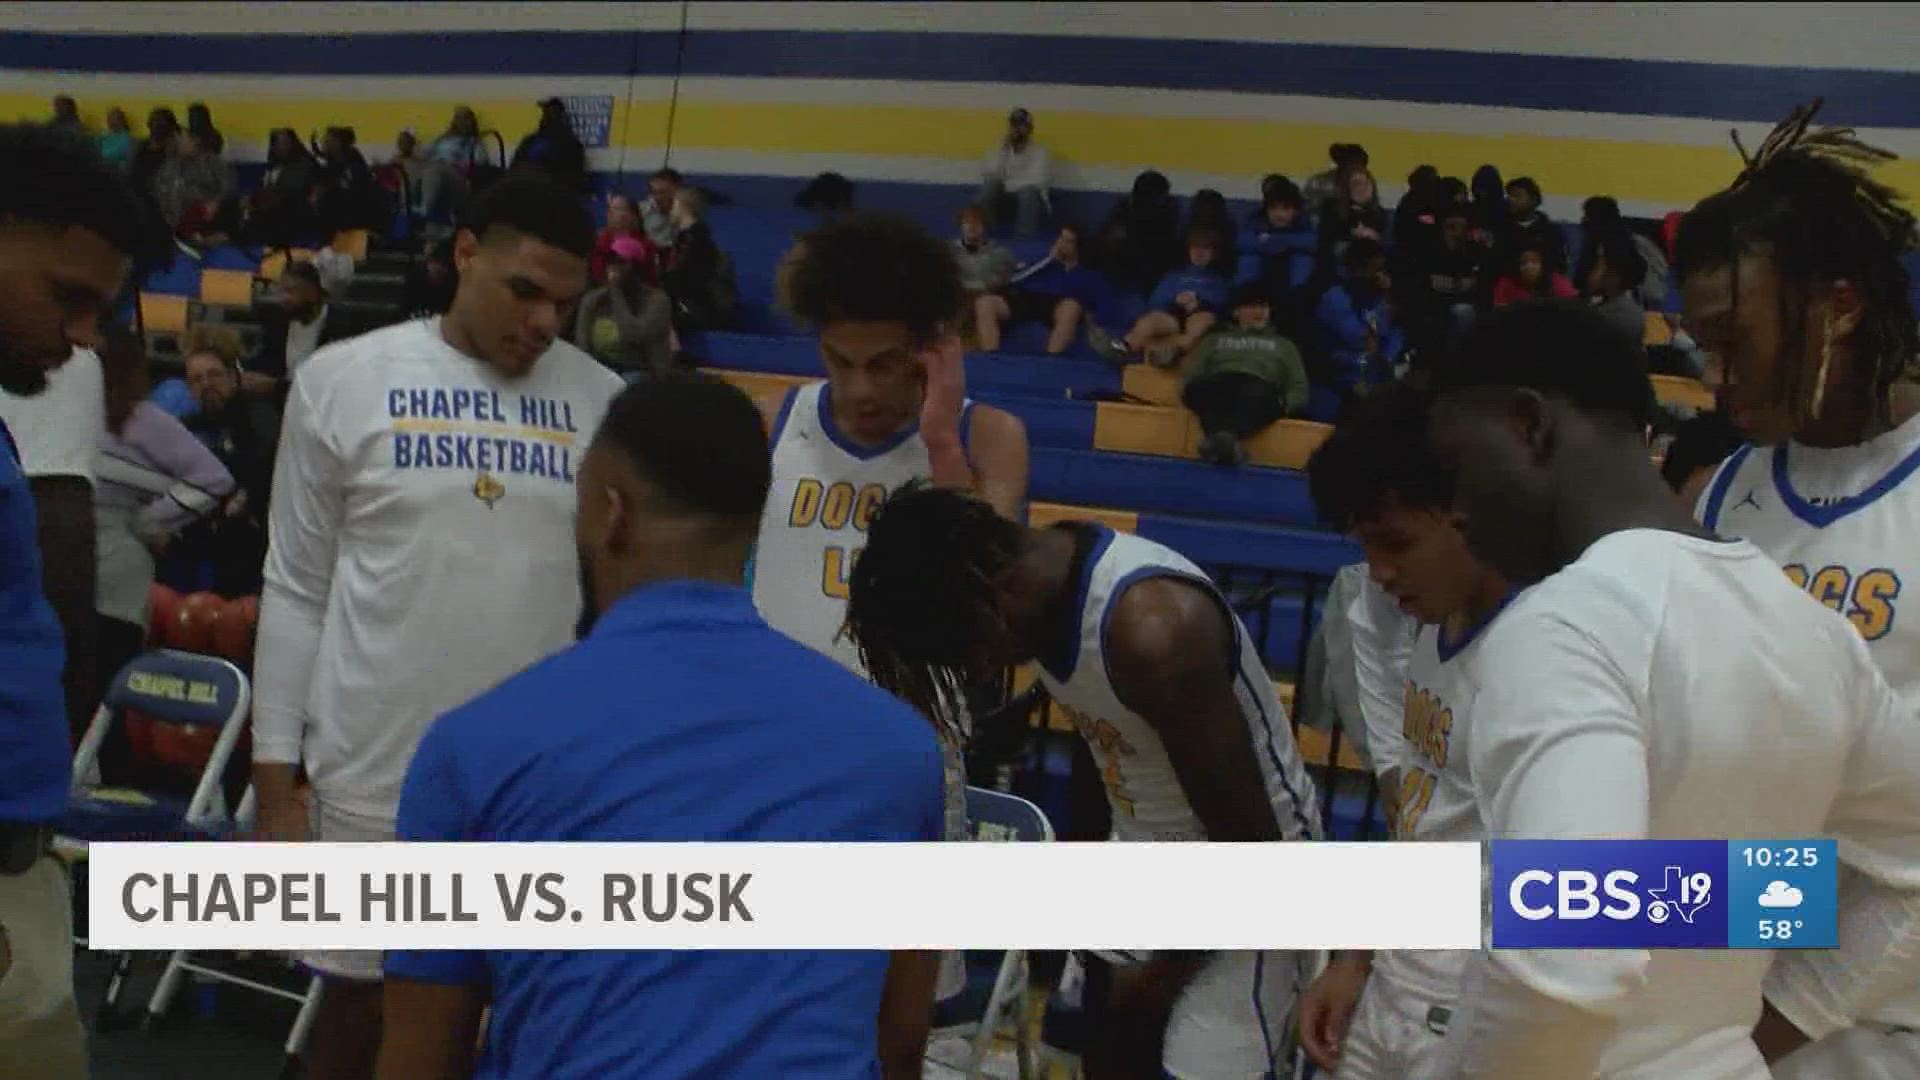 The Chapel Hill Bulldogs took on the Rusk Eagles in the final game before district play.